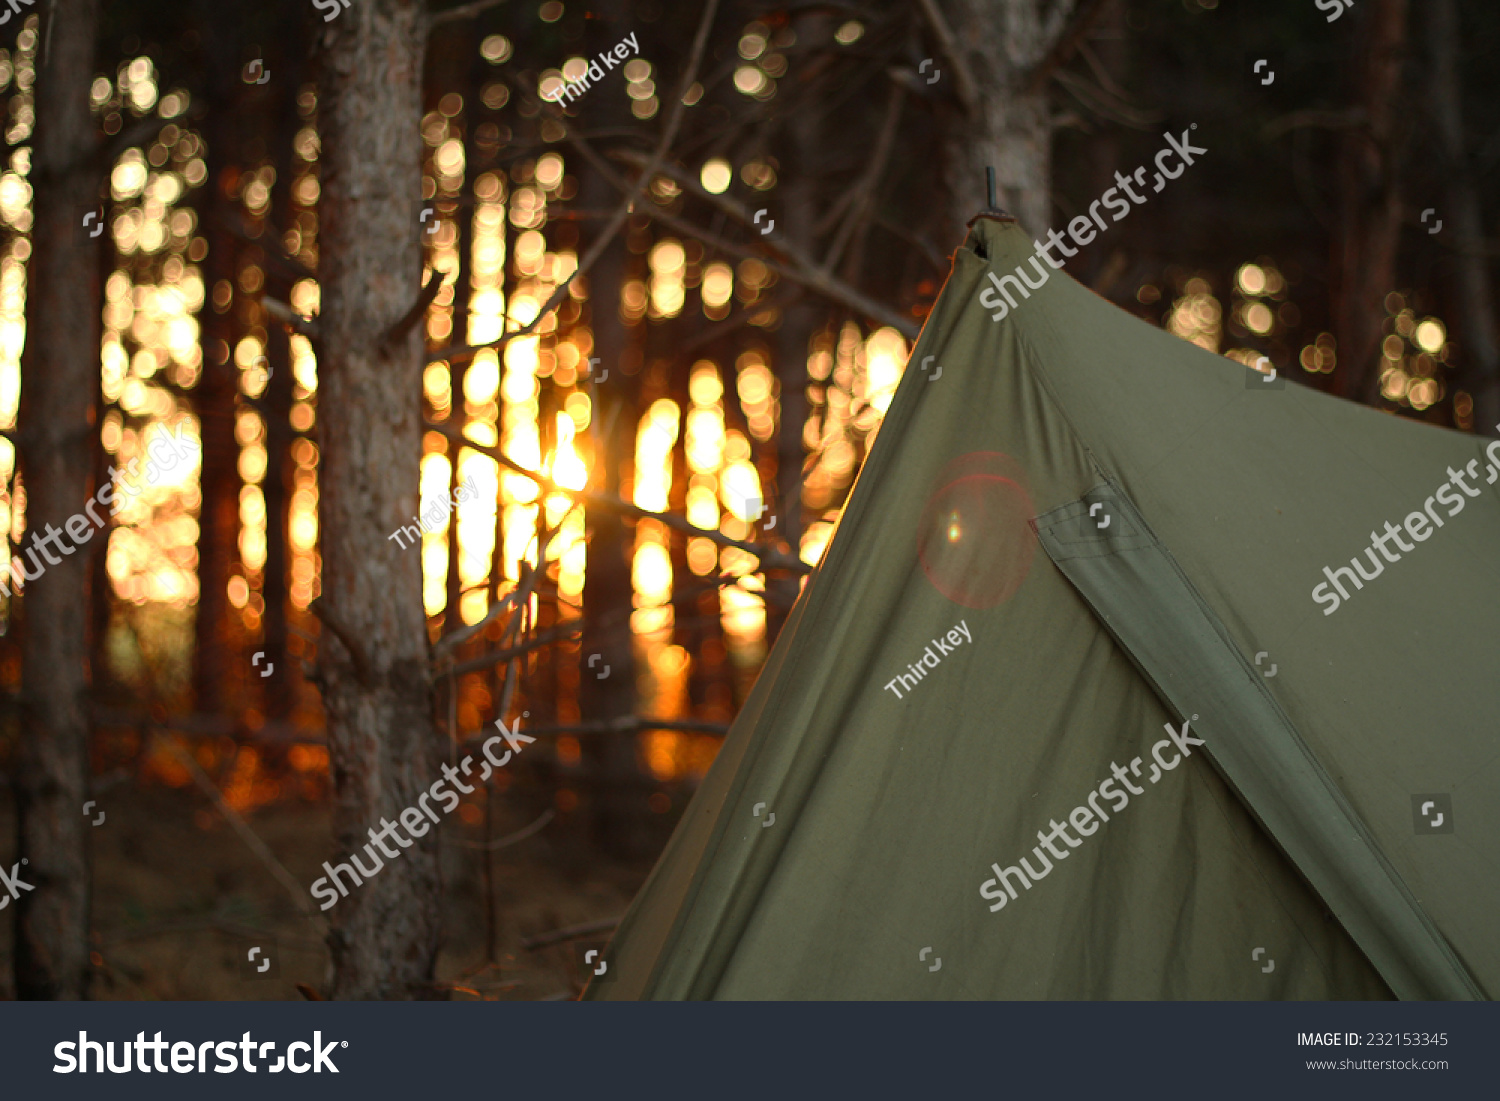 Camping tent in the forrest with sunset #232153345